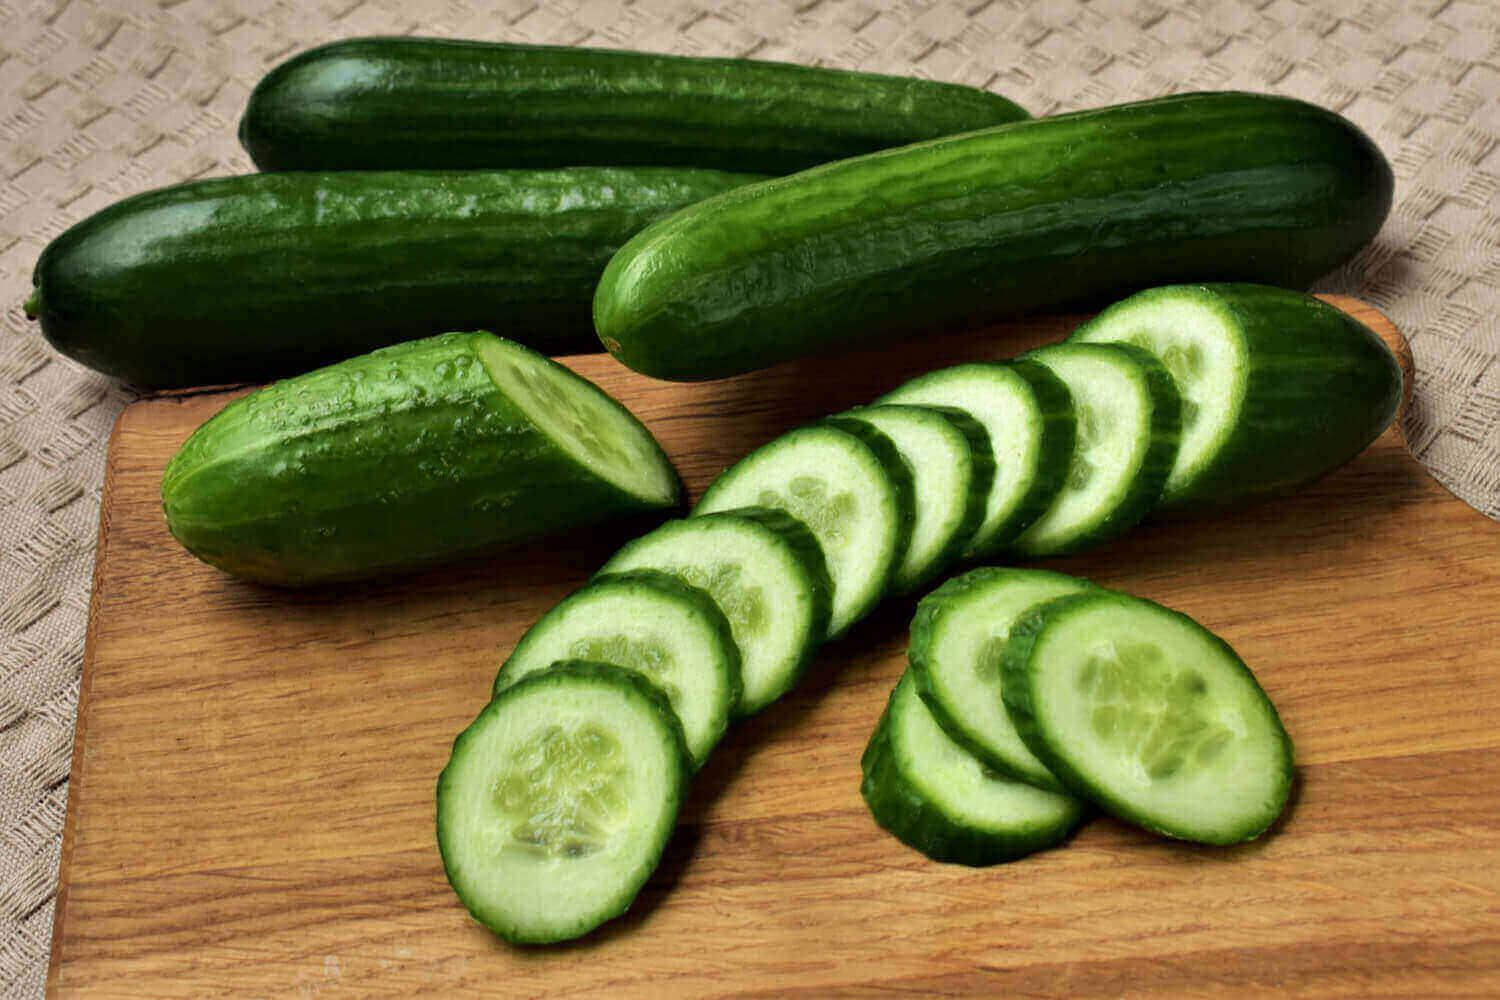 Are carrots and cucumbers good for men's health?